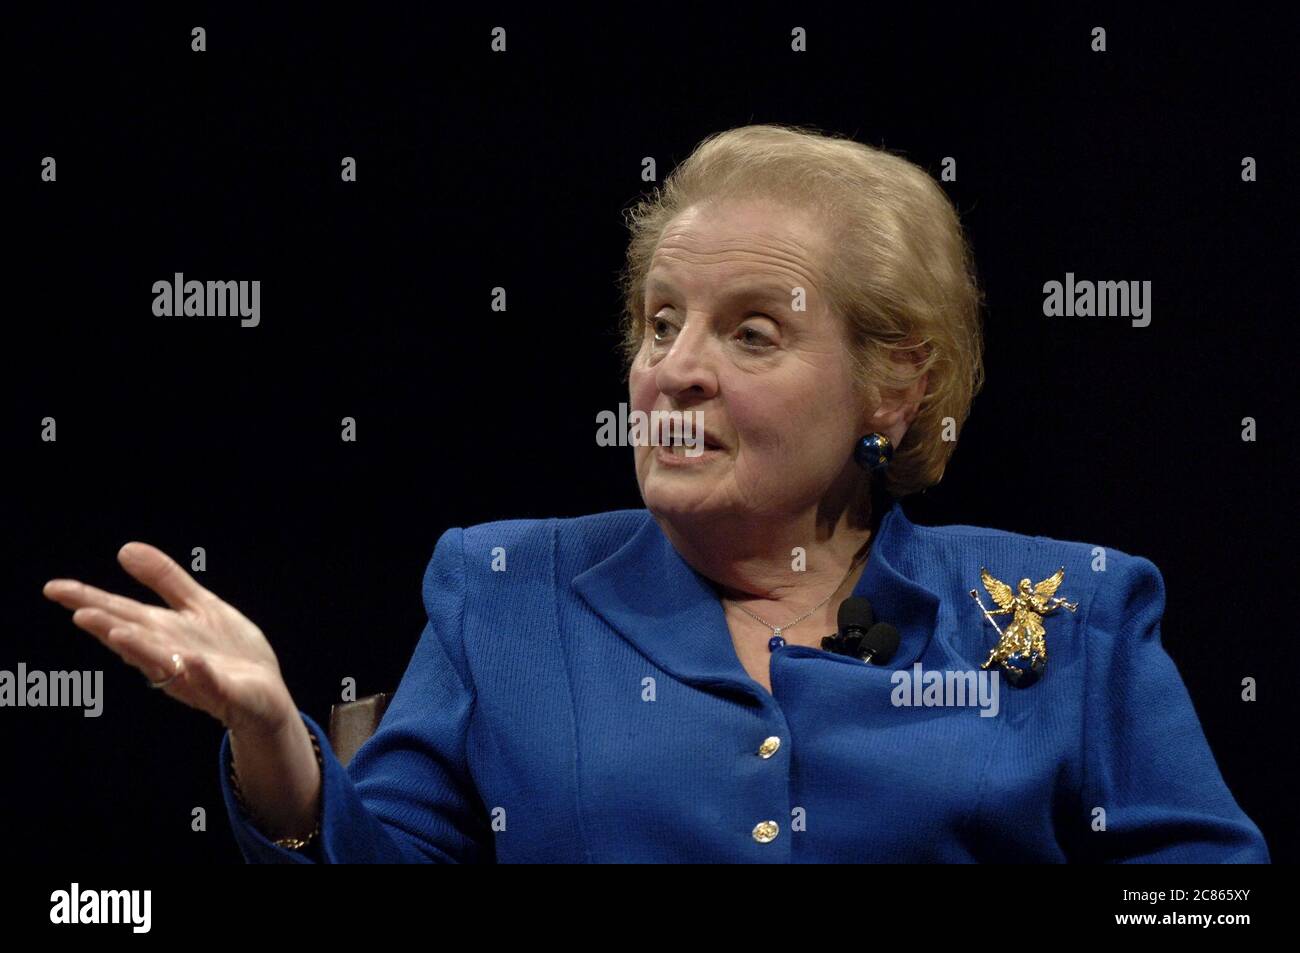 Austin, Texas USA, November 17, 2005: Former U.S. Secretary of State Madeline Albright discusses what she says is the failed foreign policy of the Bush administration during an appearance at St. Edward's University. Albright served eight years under President Clinton. ©Bob Daemmrich Stock Photo